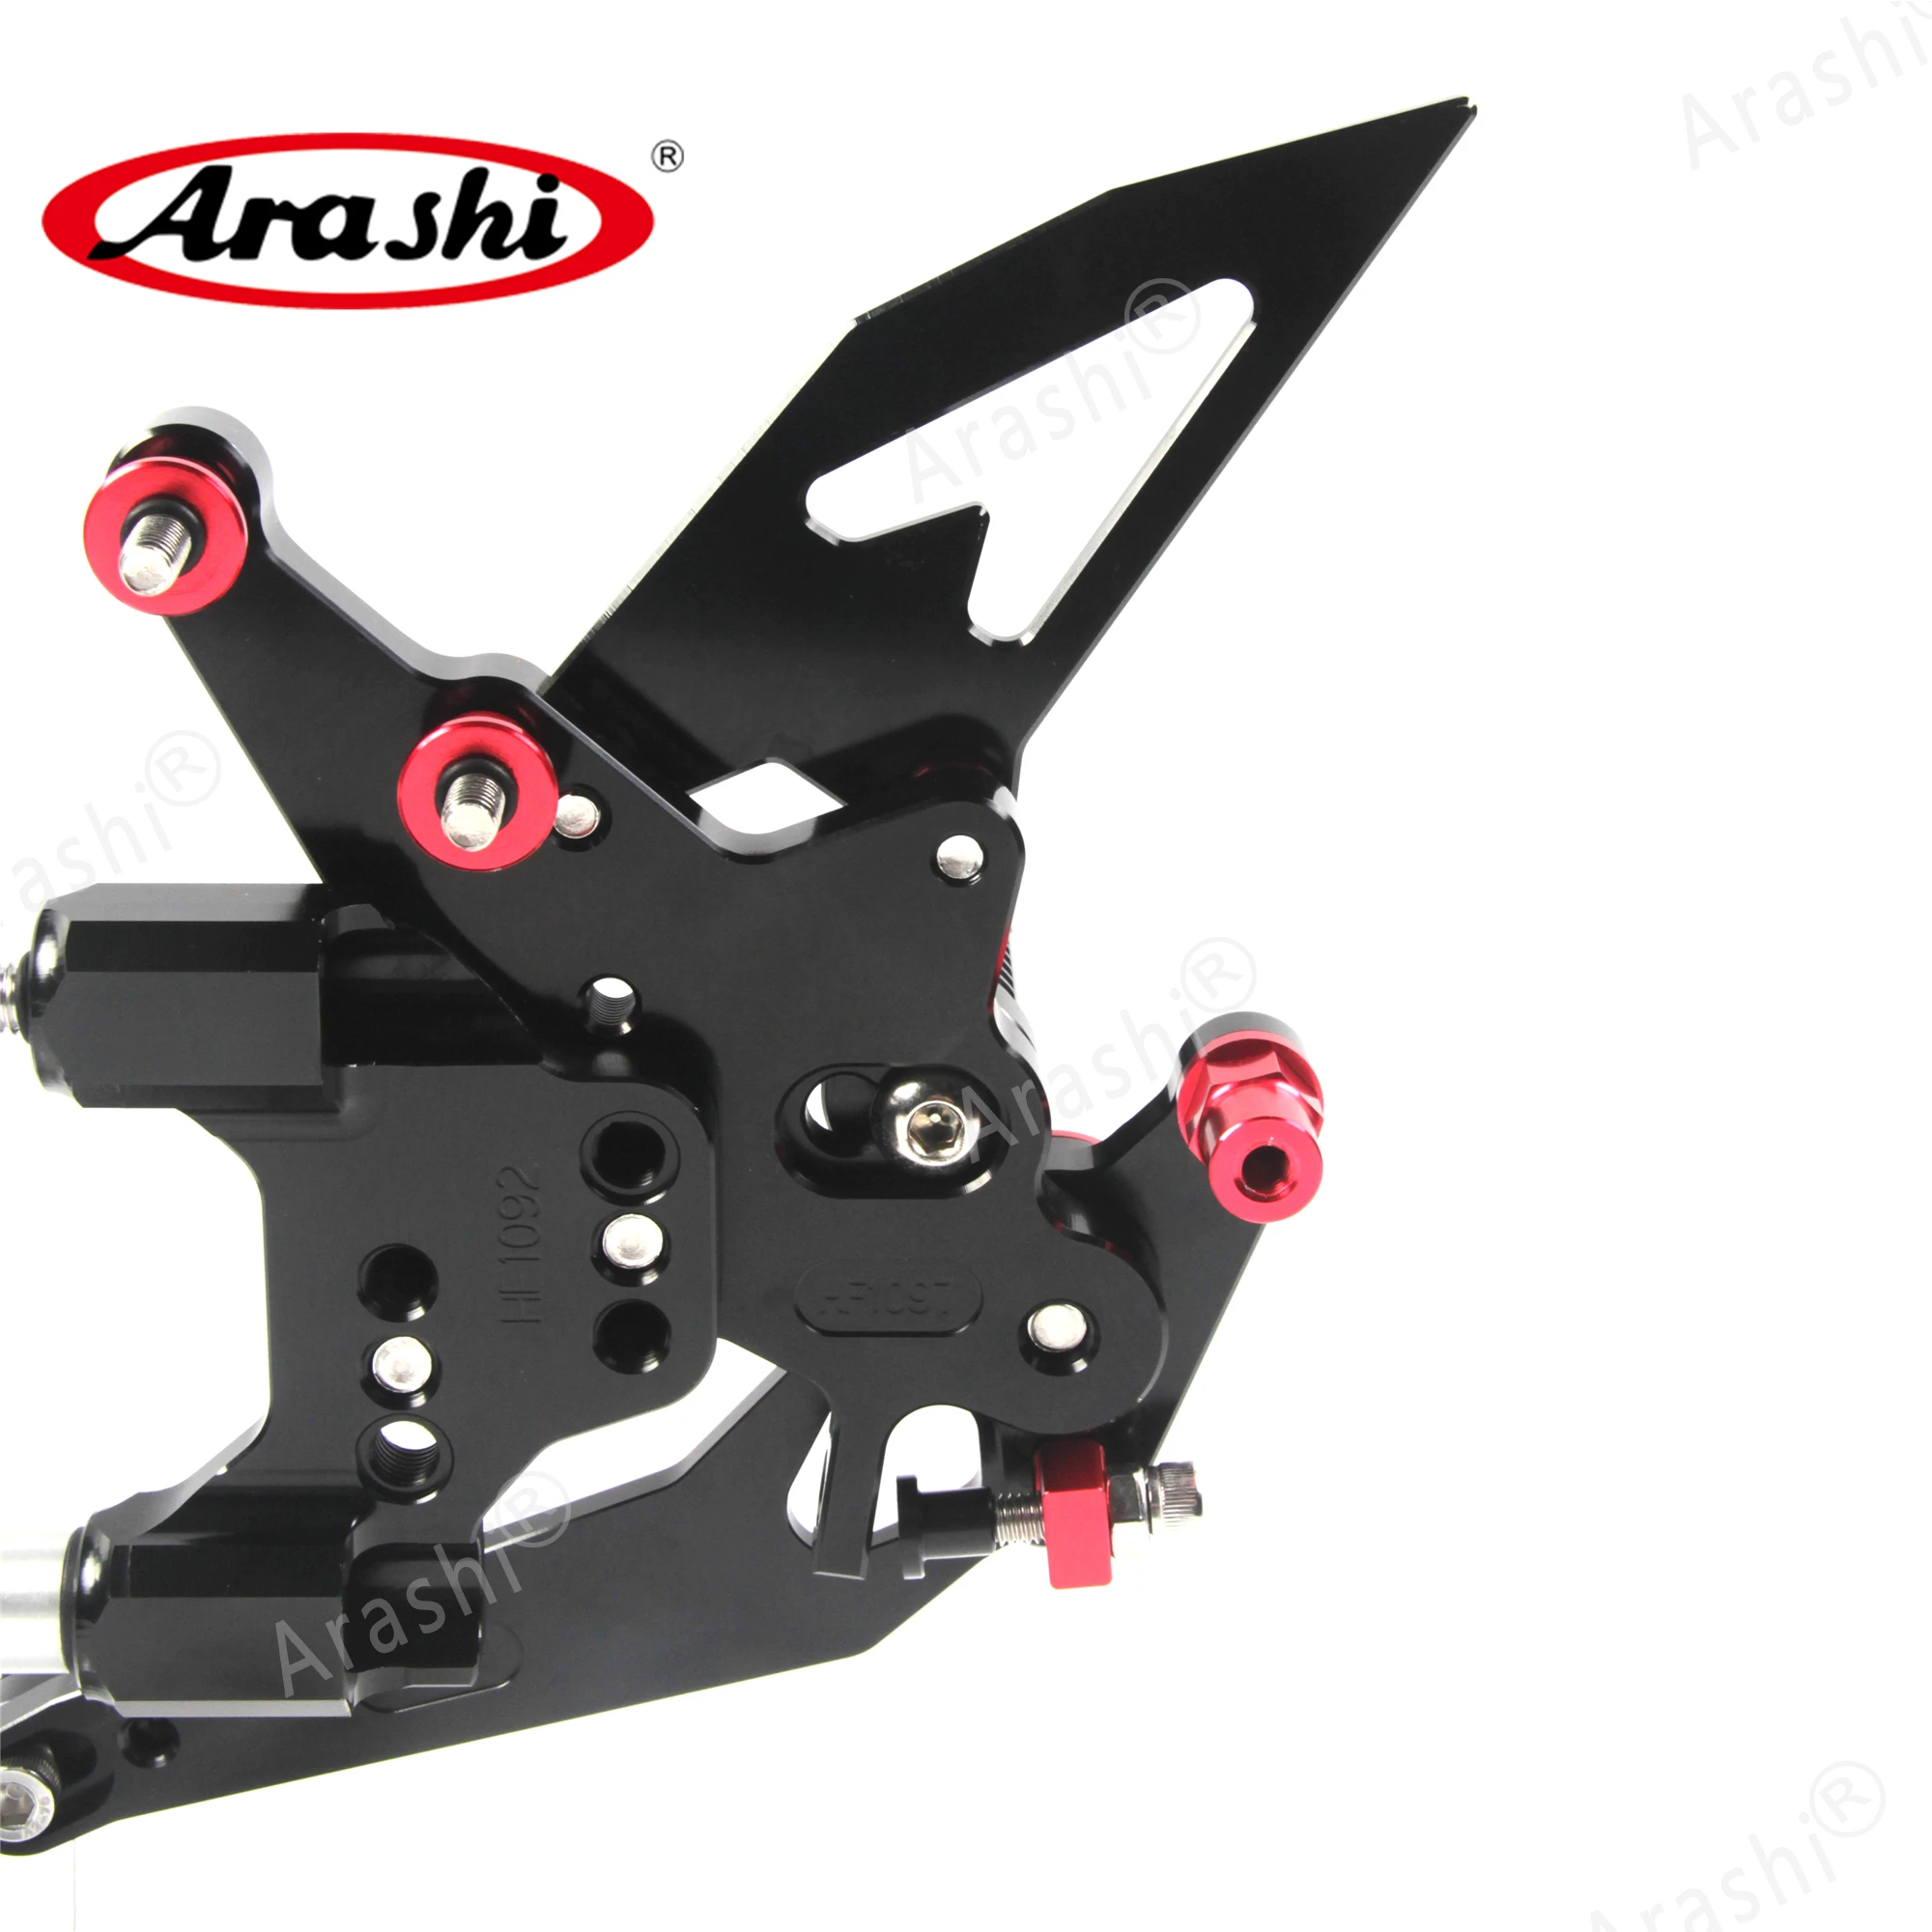 

For DUCATI 959 Panigale 2016 - 2019 Adjustable Footrest Foot Pegs Rearset Foot Rests CNC Rider Silver Black Gold Aluminum Arashi